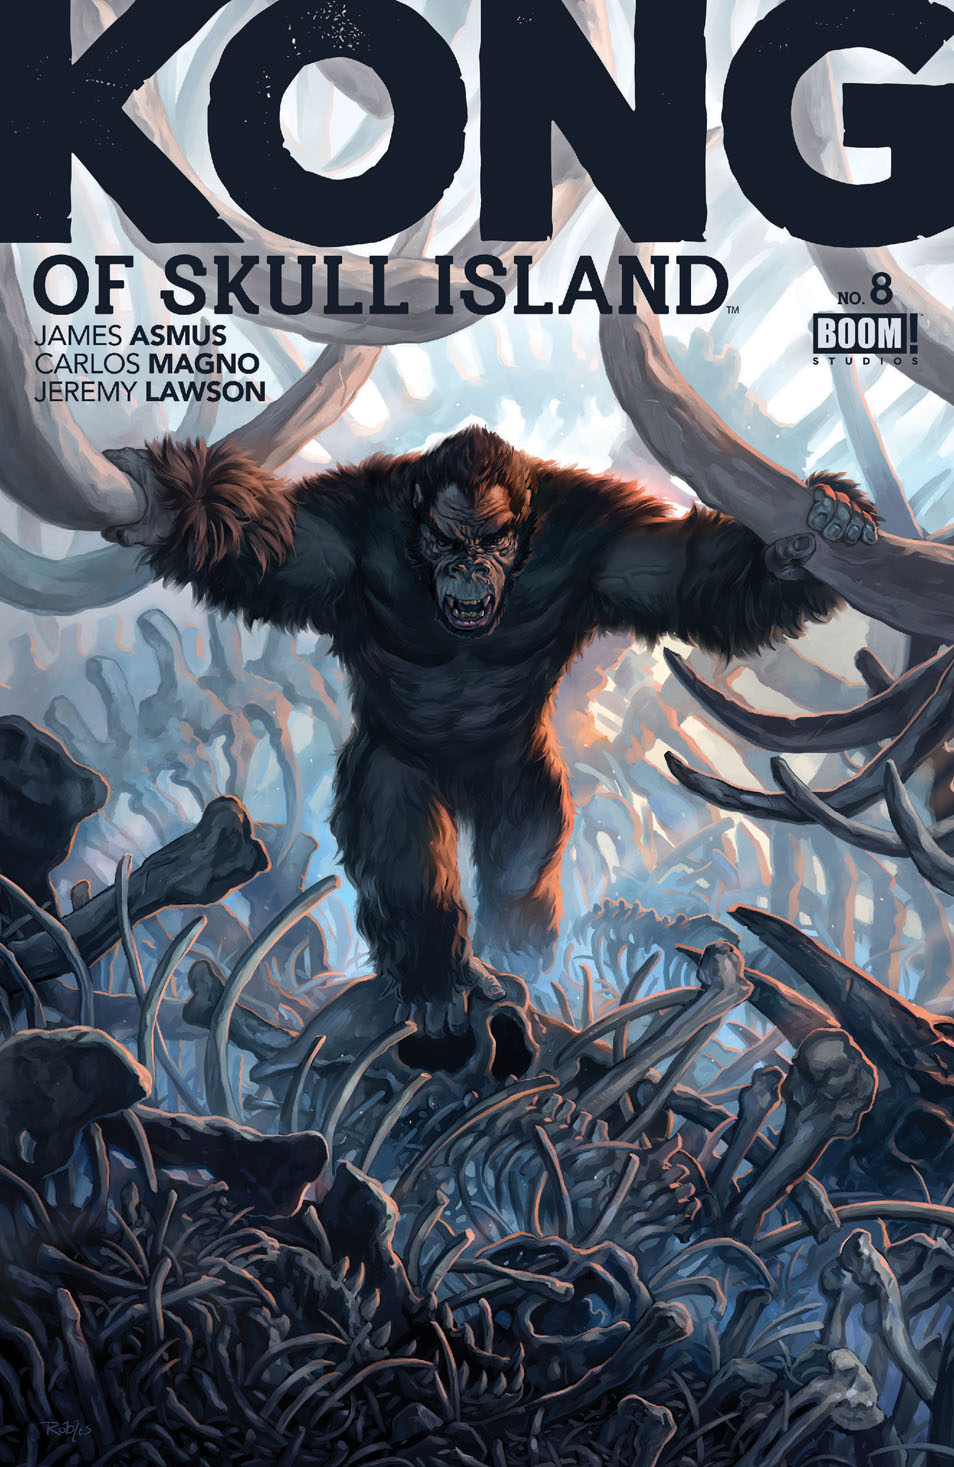 This image is the cover for the book Kong of Skull Island #8, Kong of Skull Island